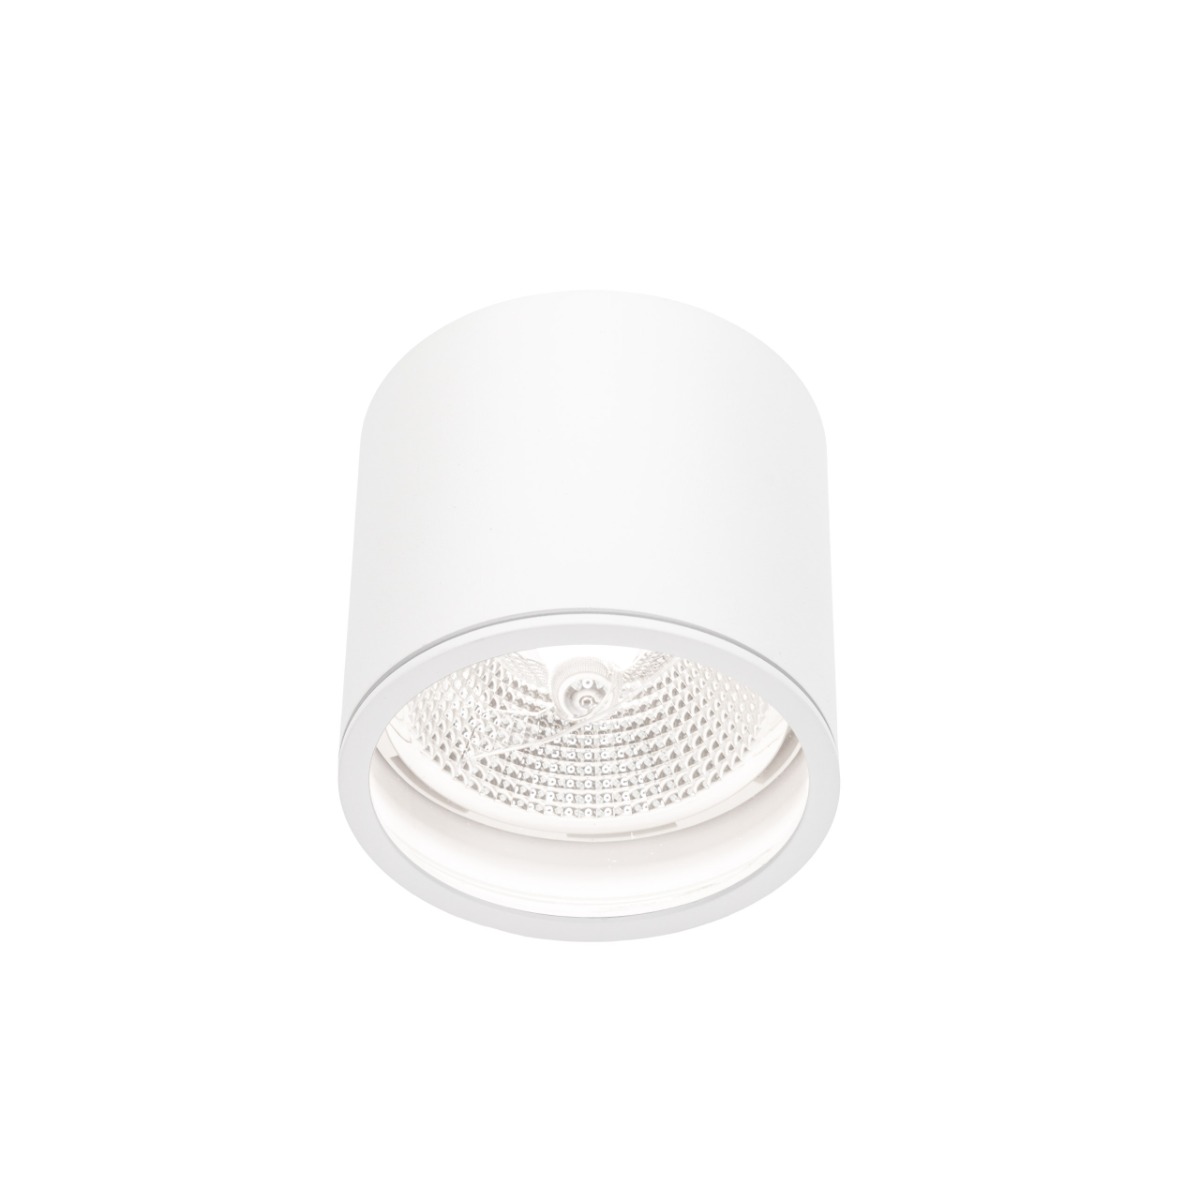 LED Spot AR111 GU10 Surfaced-Mounted White Round 120x115mm IP65